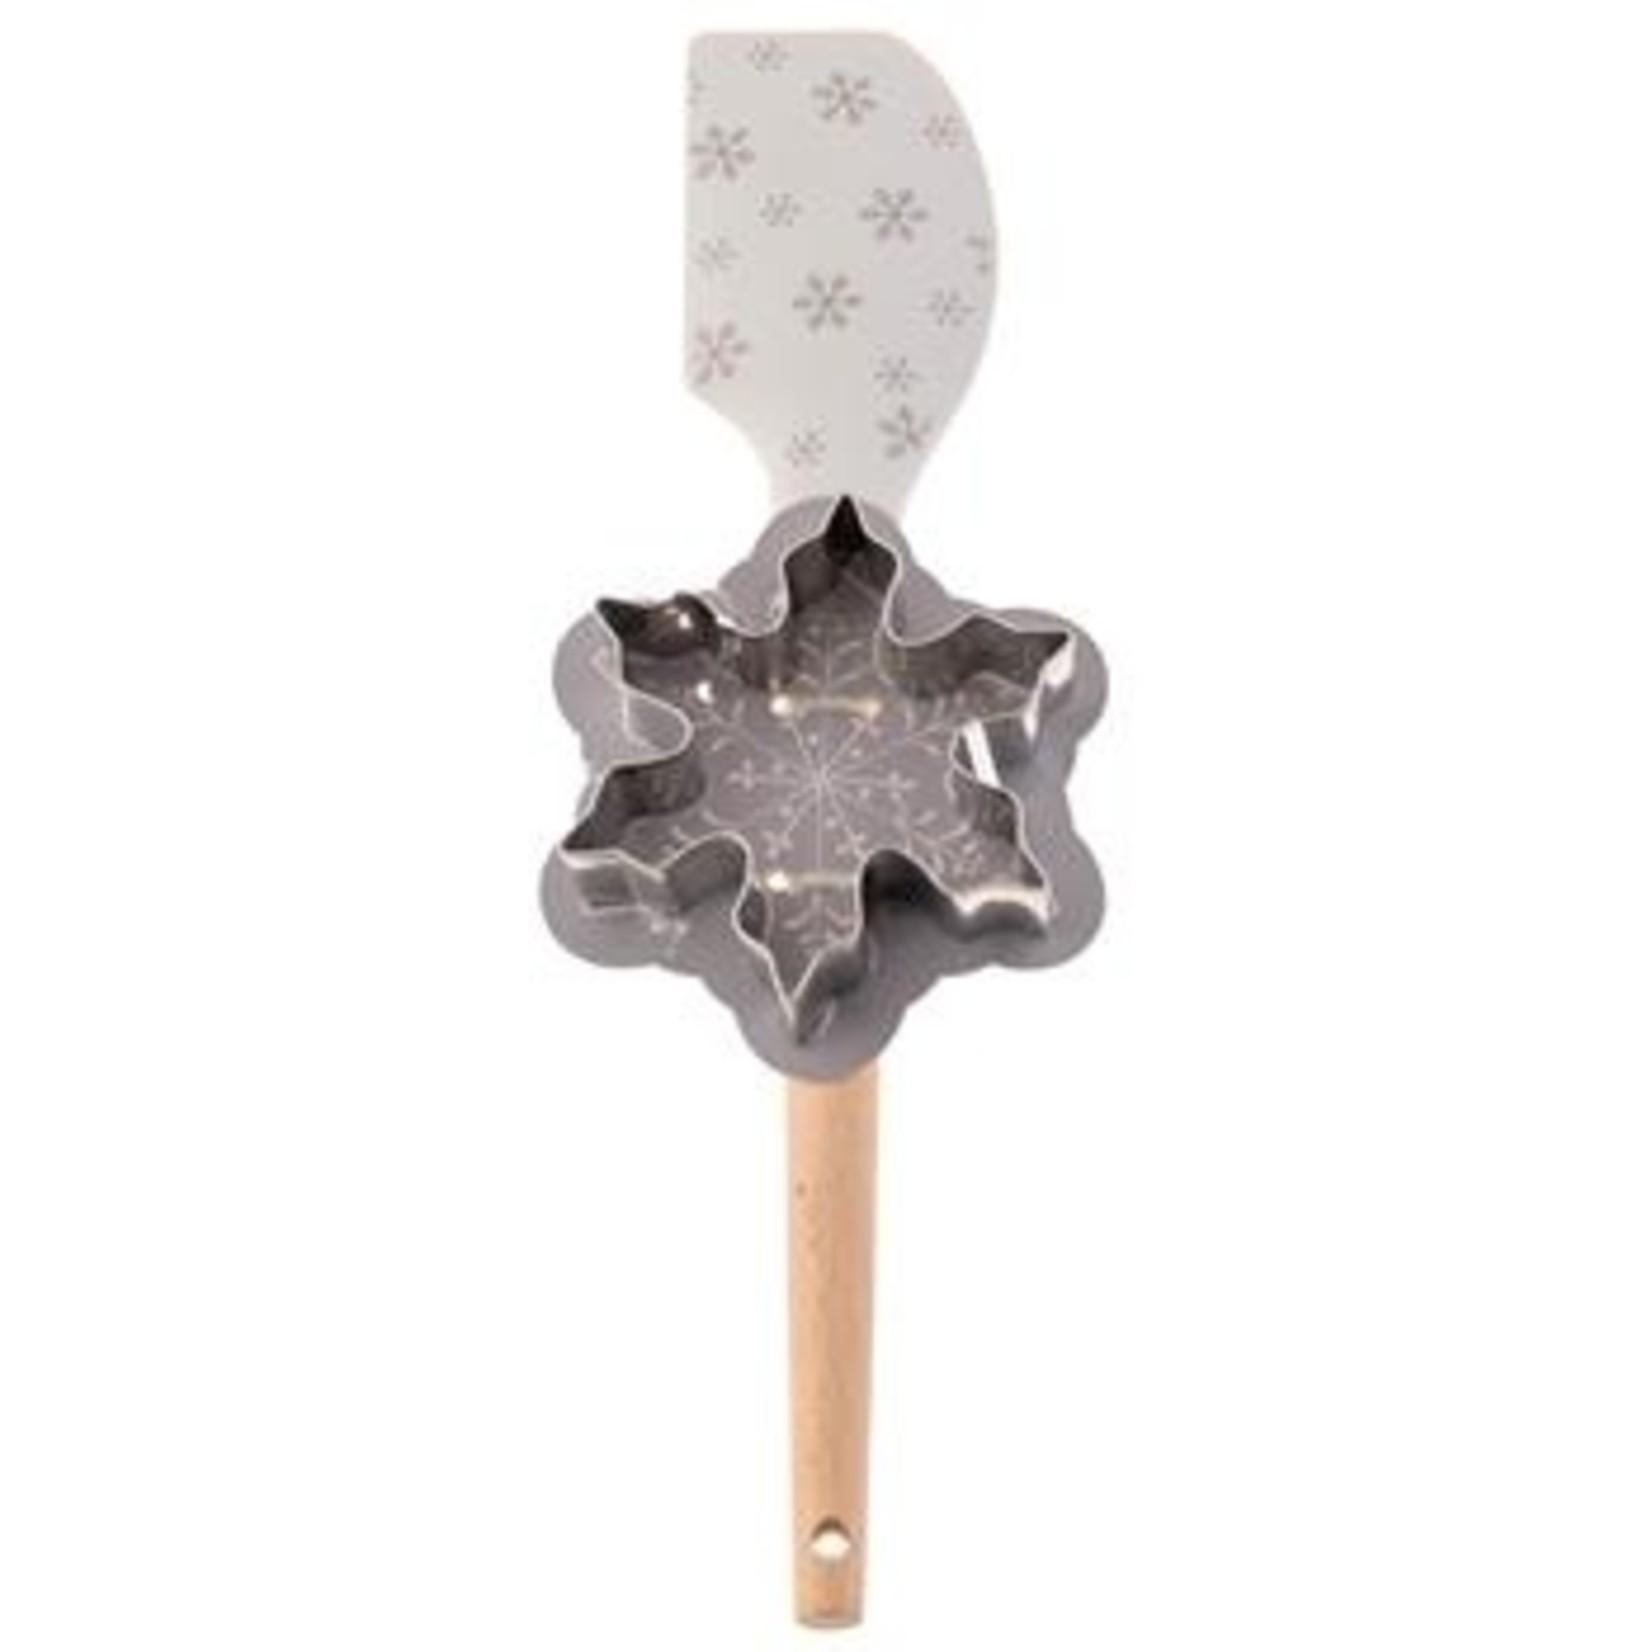 Spatula and Snowflake Cookie Cutter Set